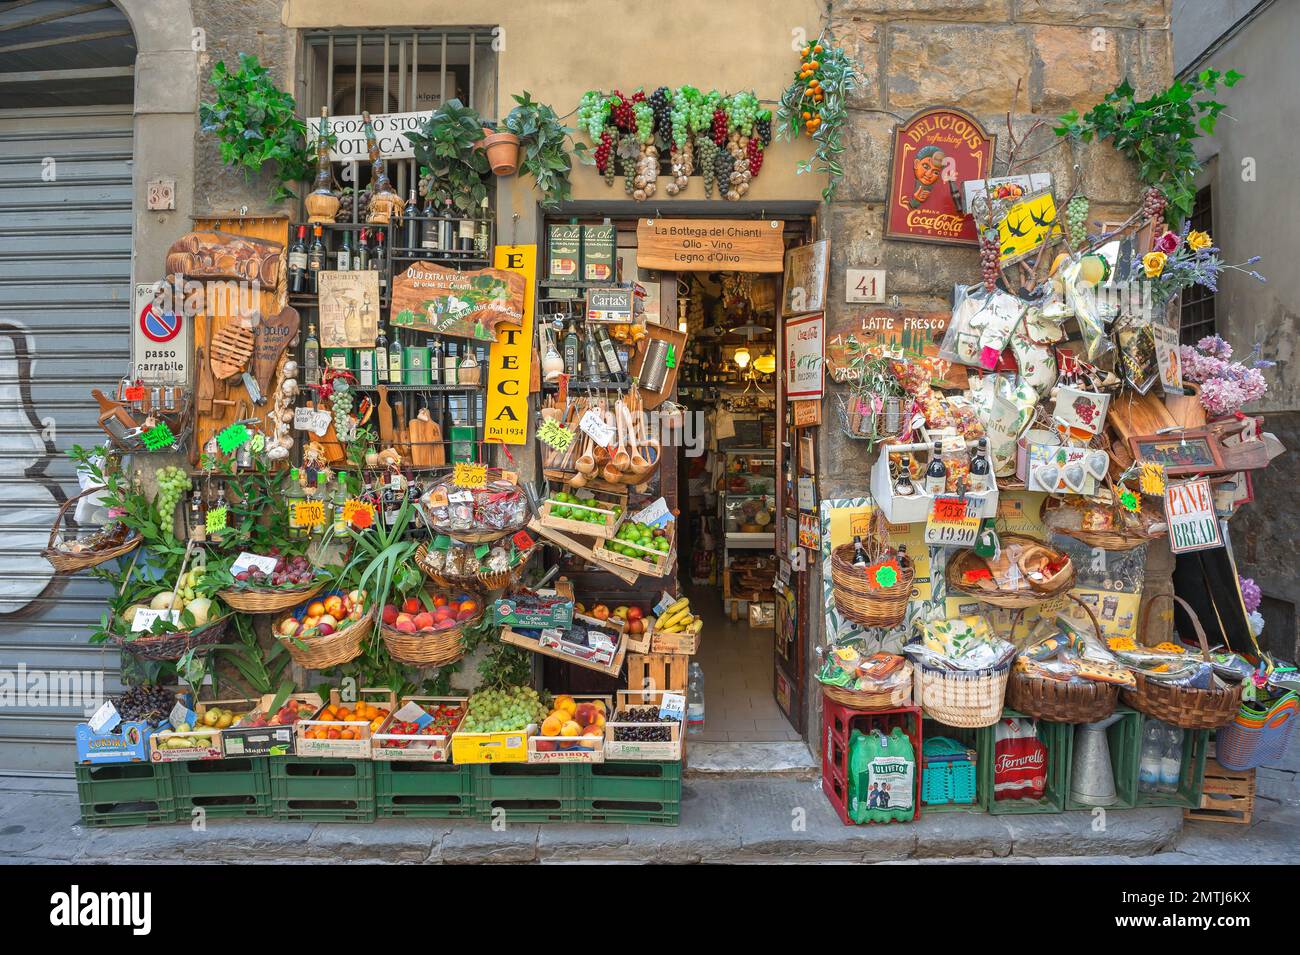 Italy food shop, view of a colourful display of local produce outside a food shop in a street in the center of the historic city of Florence, Italy. Stock Photo